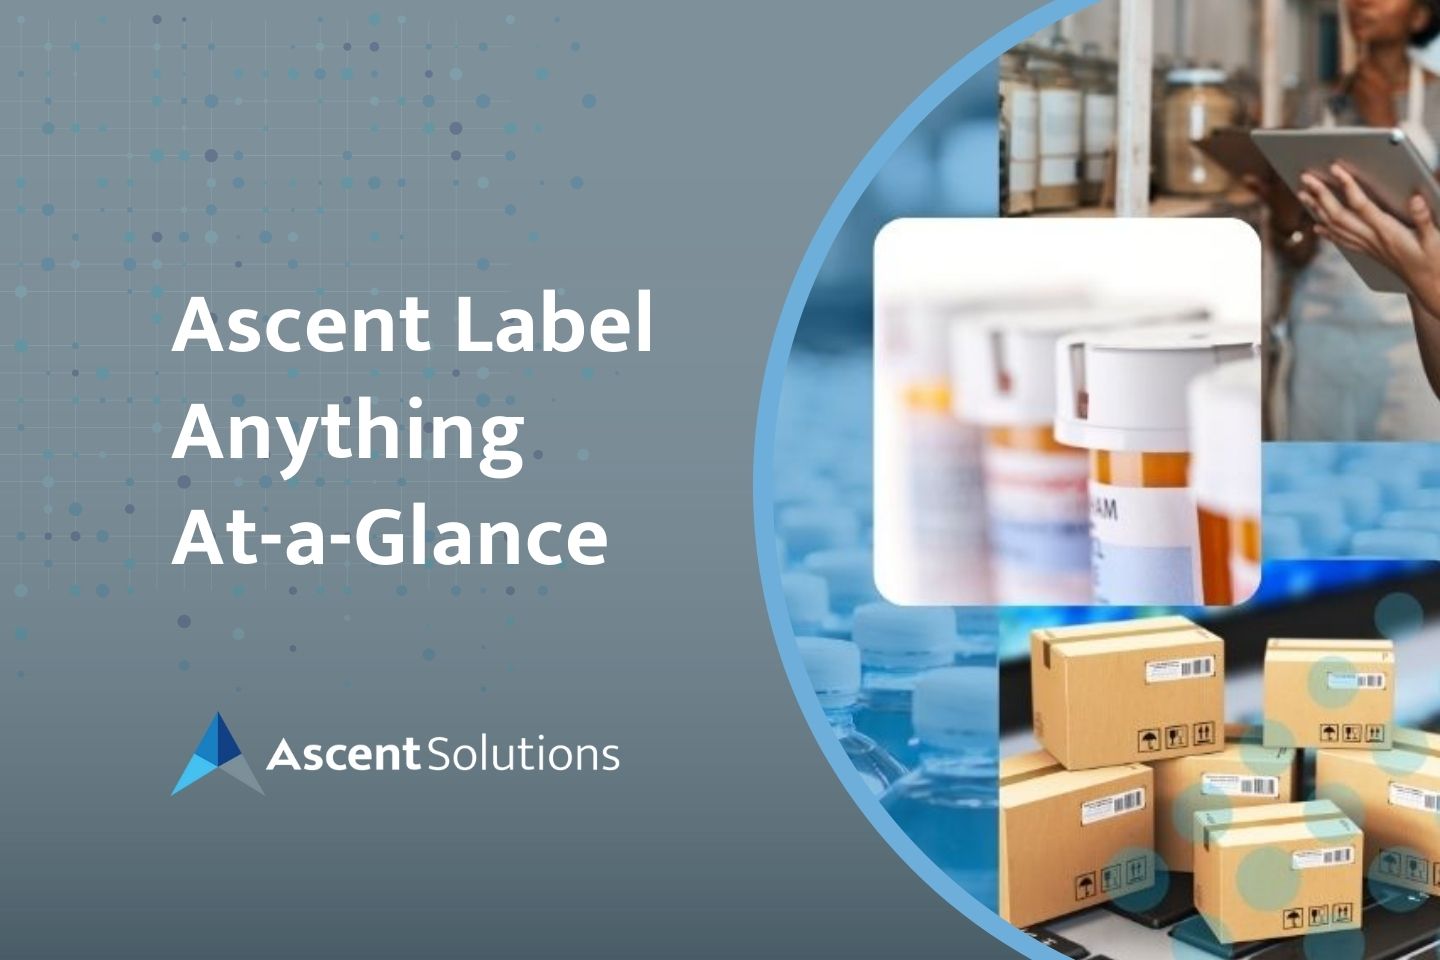 Ascent label Anything At-a-Glance